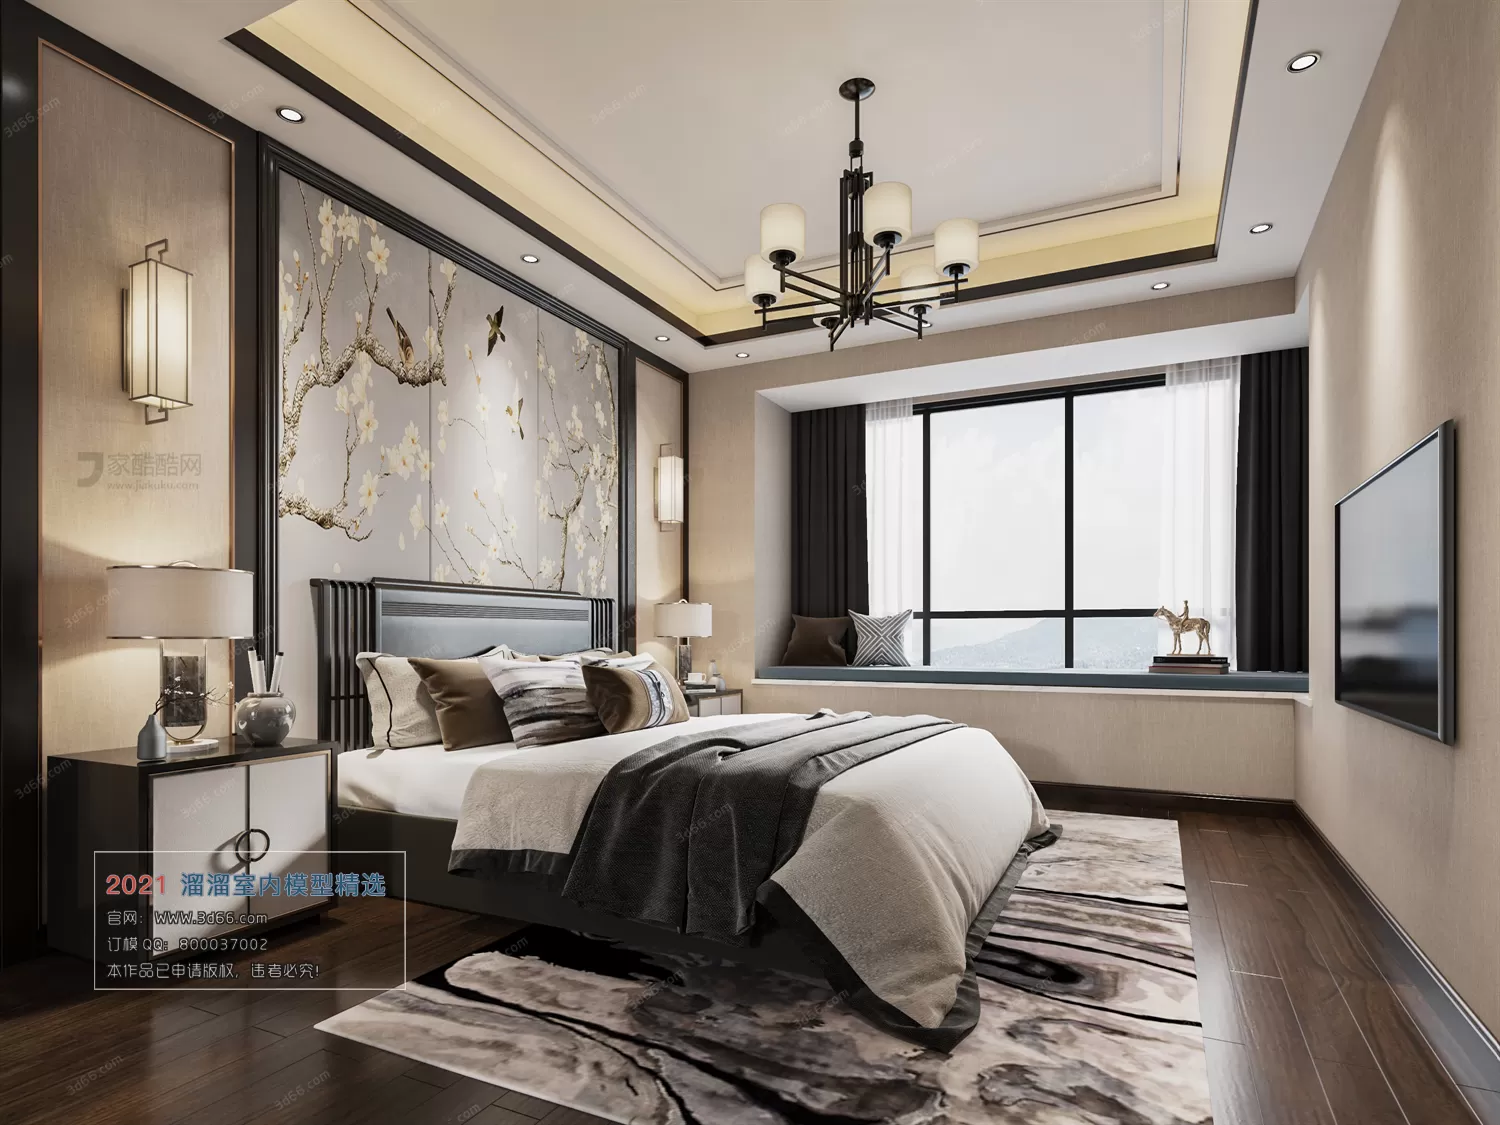 BEDROOM – C001-Chinese style-Vray model